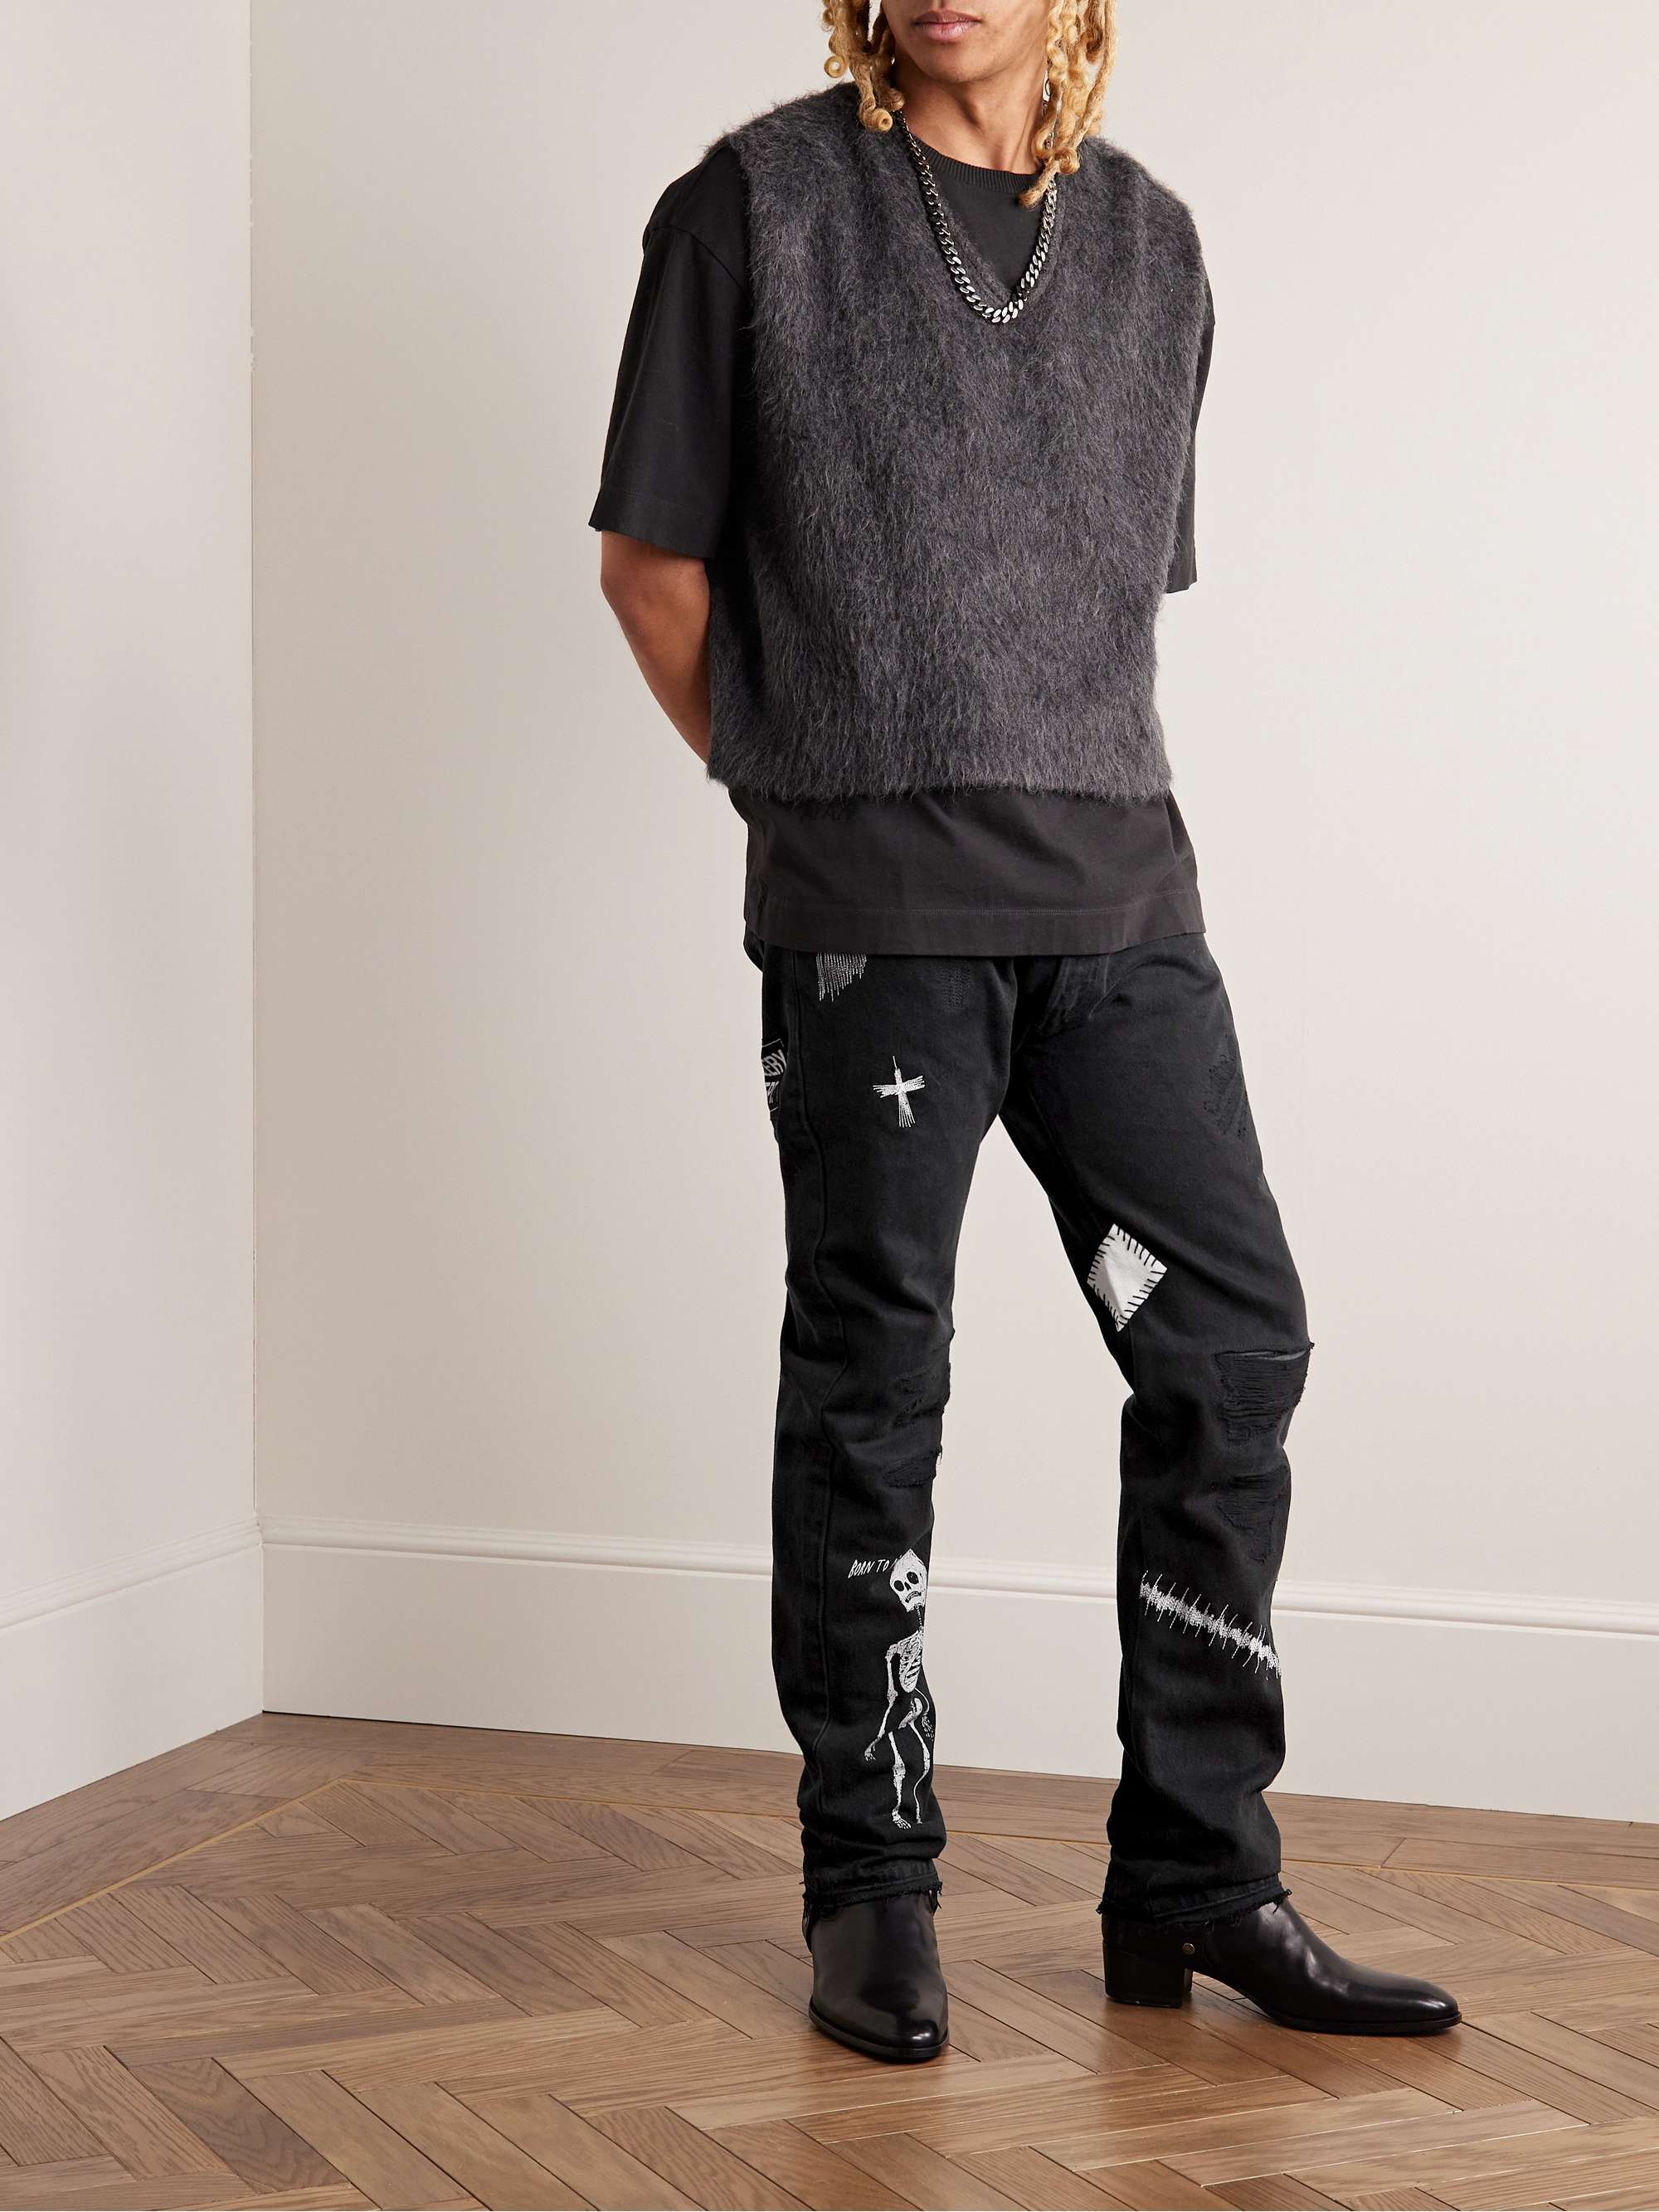 GALLERY DEPT. Slim-Fit Straight-Leg Painted Embroidered Distressed Jeans  for Men | MR PORTER